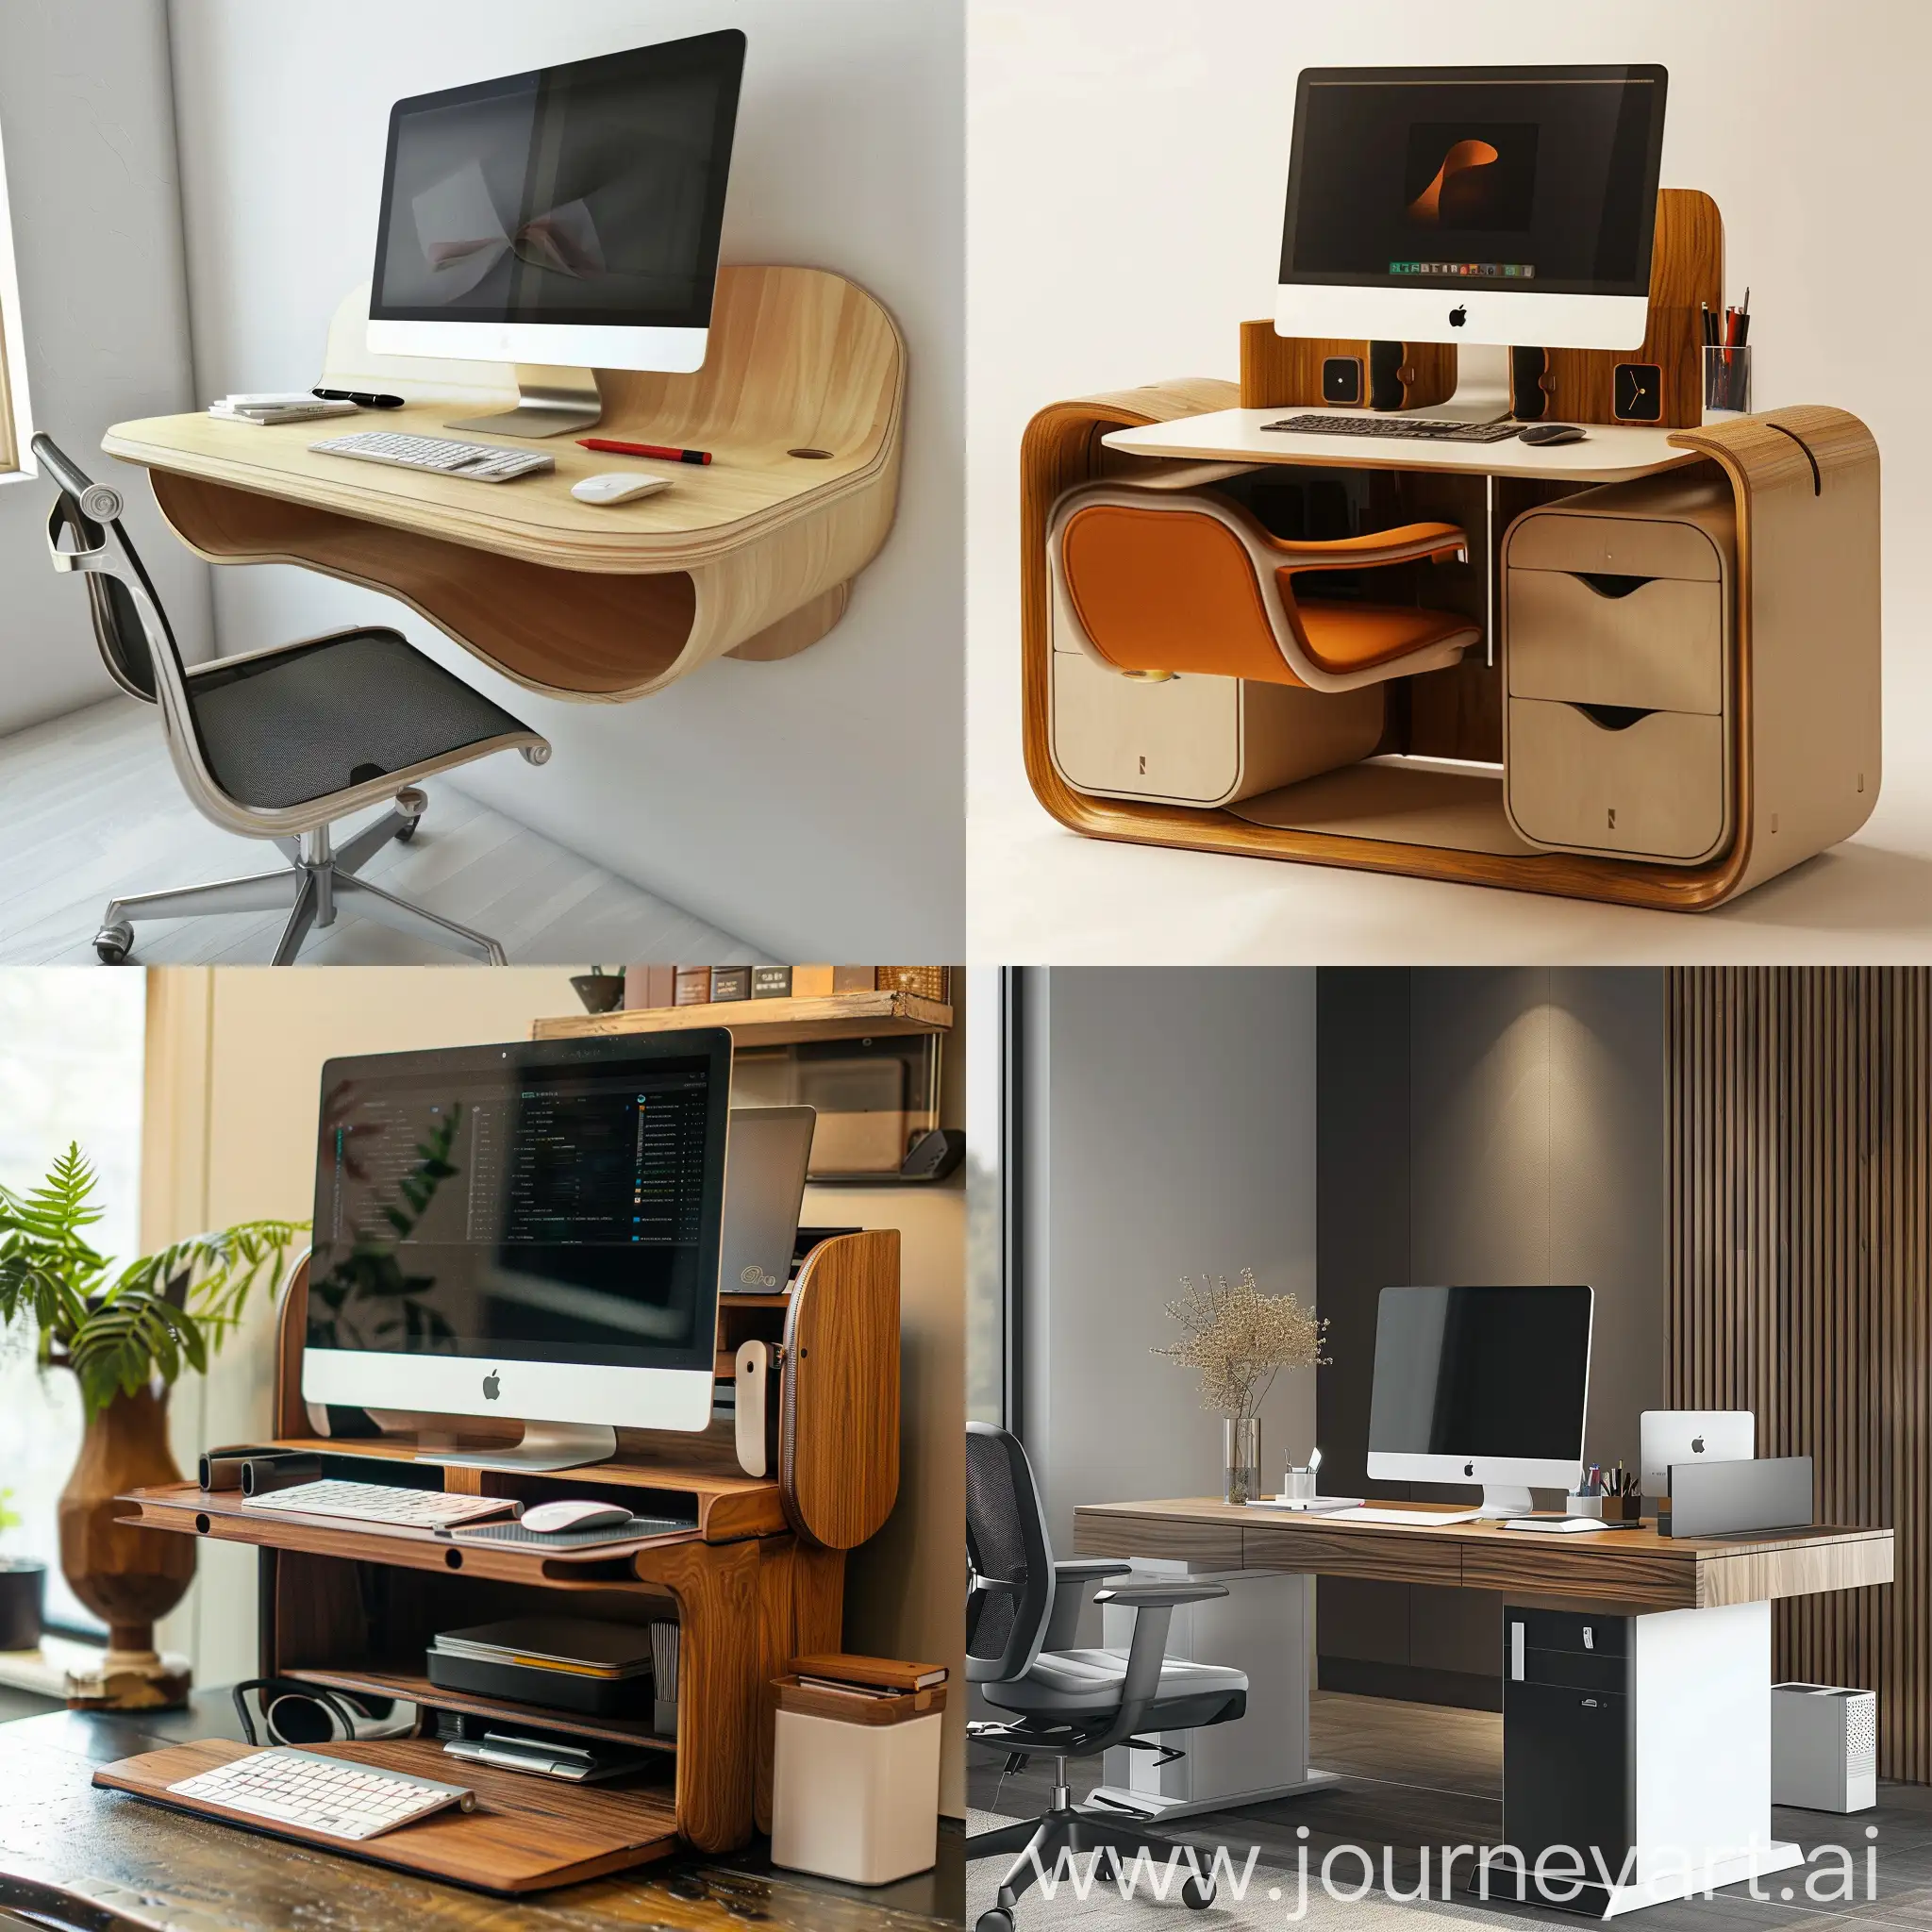 A compact office workstation with an elegant design